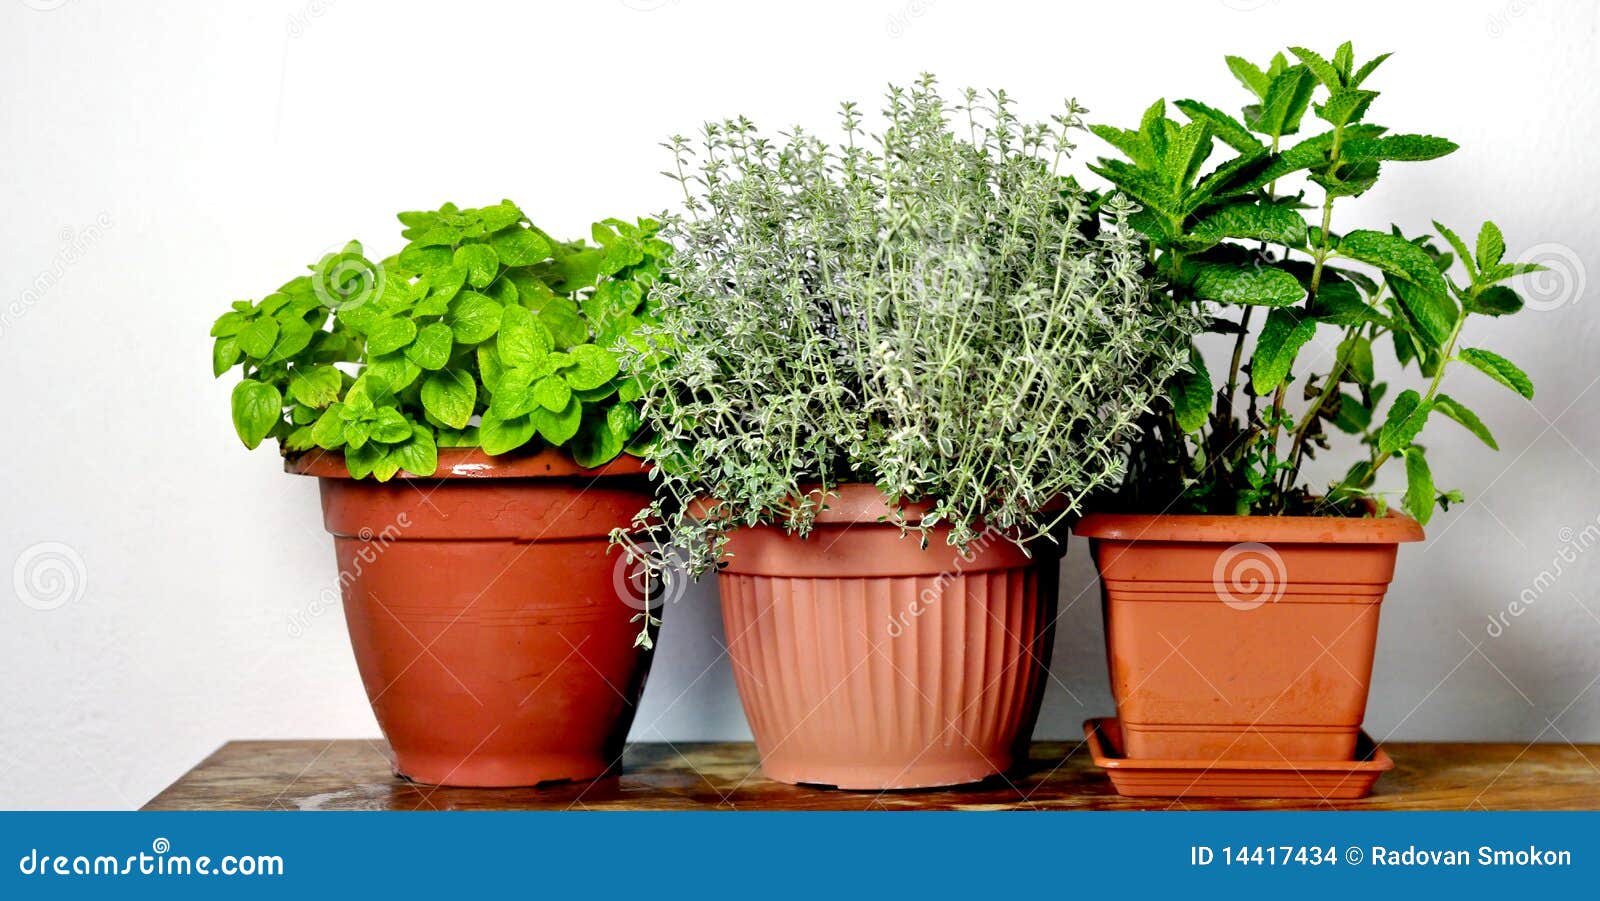 Mixed herbs stock photo. Image of diet, freshness 